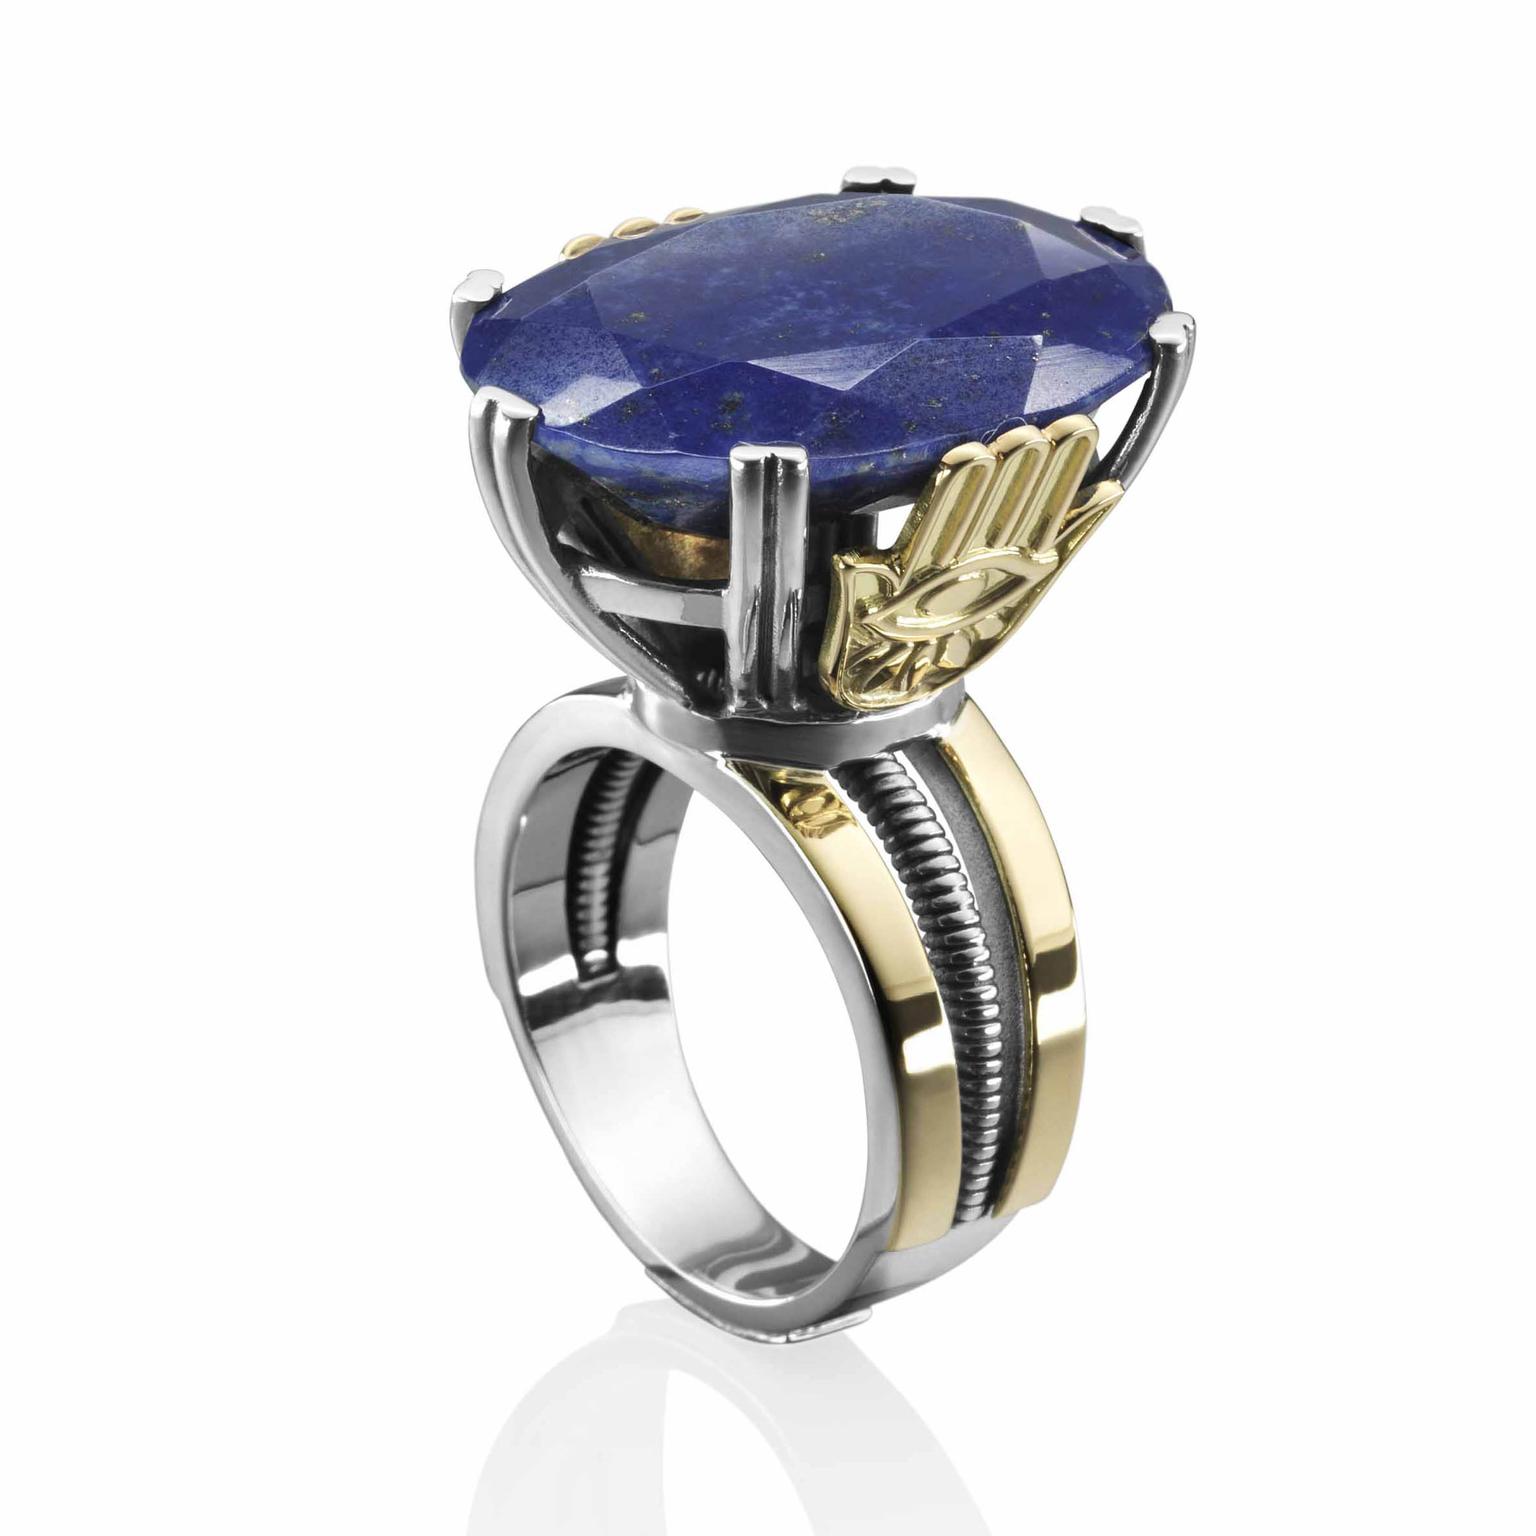 Talisman inspired ring set with Royal Blue lapis lazuli by Azza Fahmy